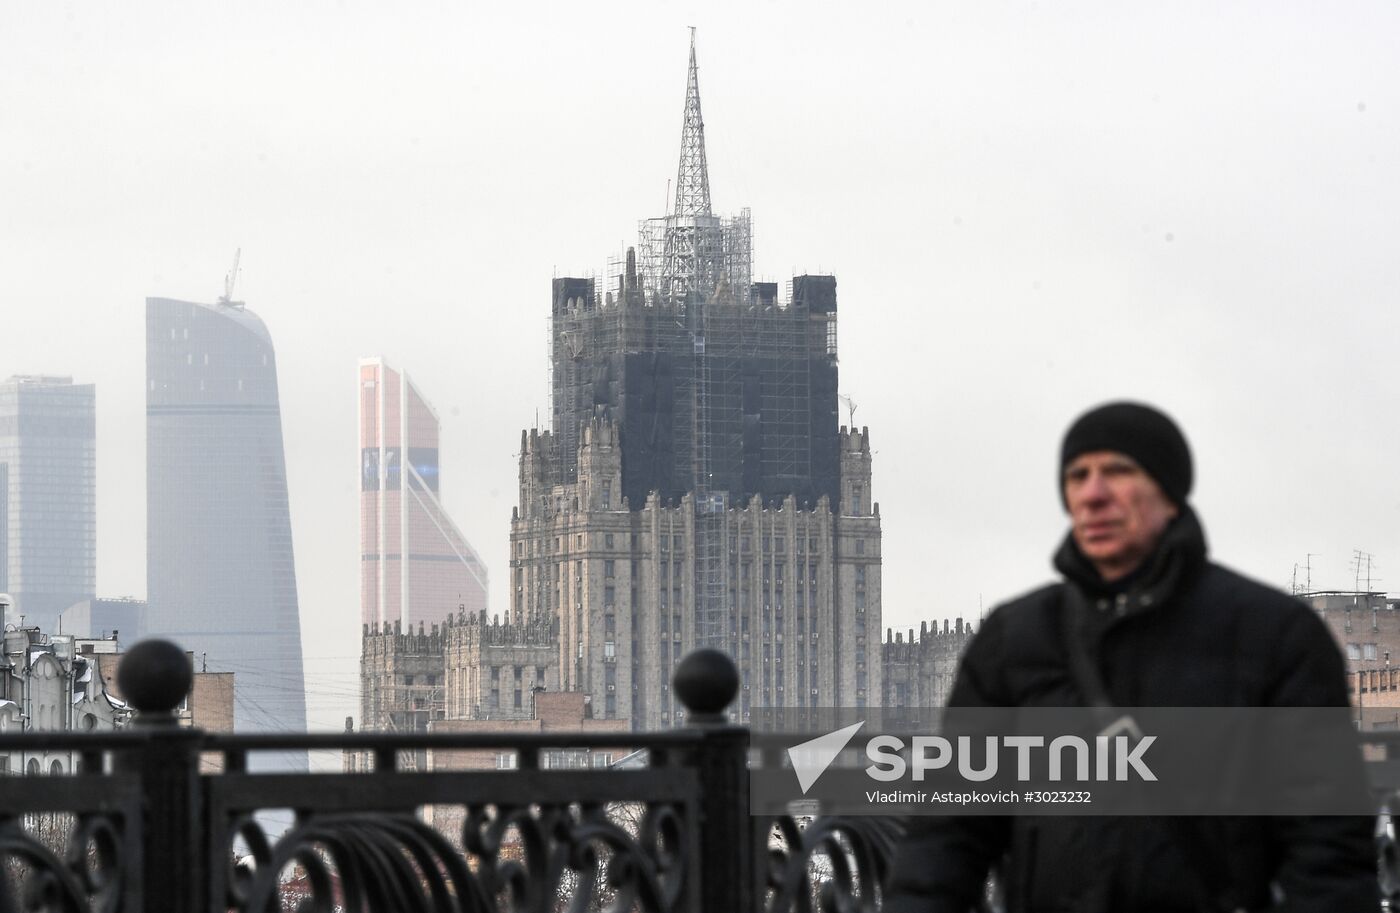 Renovation of Foreign Ministry's spire continues